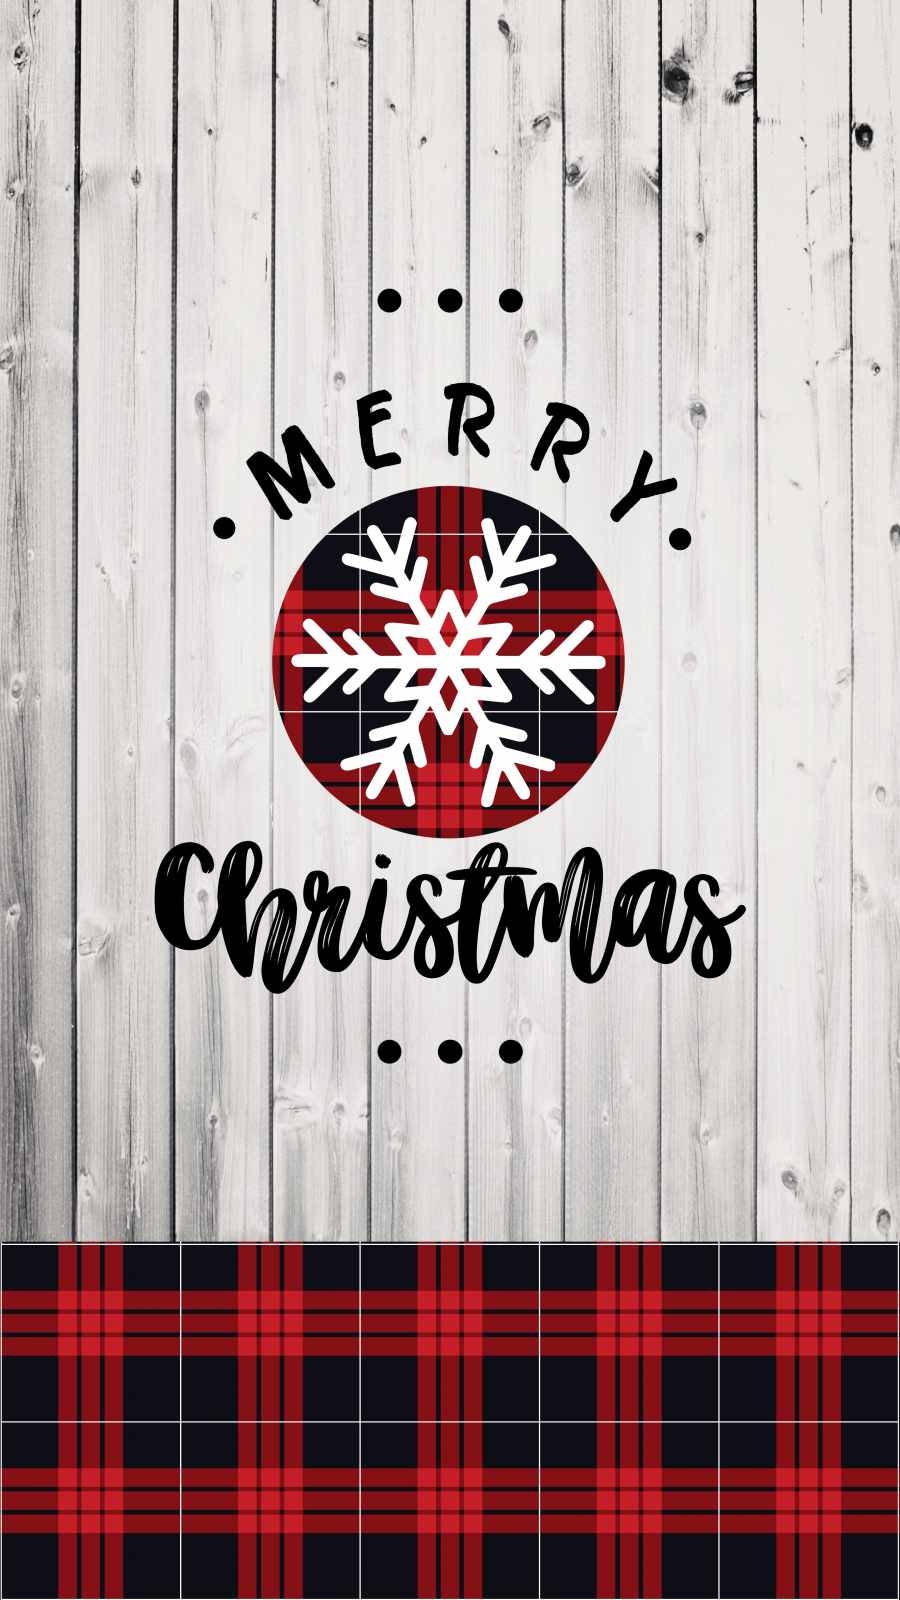 Wooden Plaid Merry Christmas Iphone Wallpaper